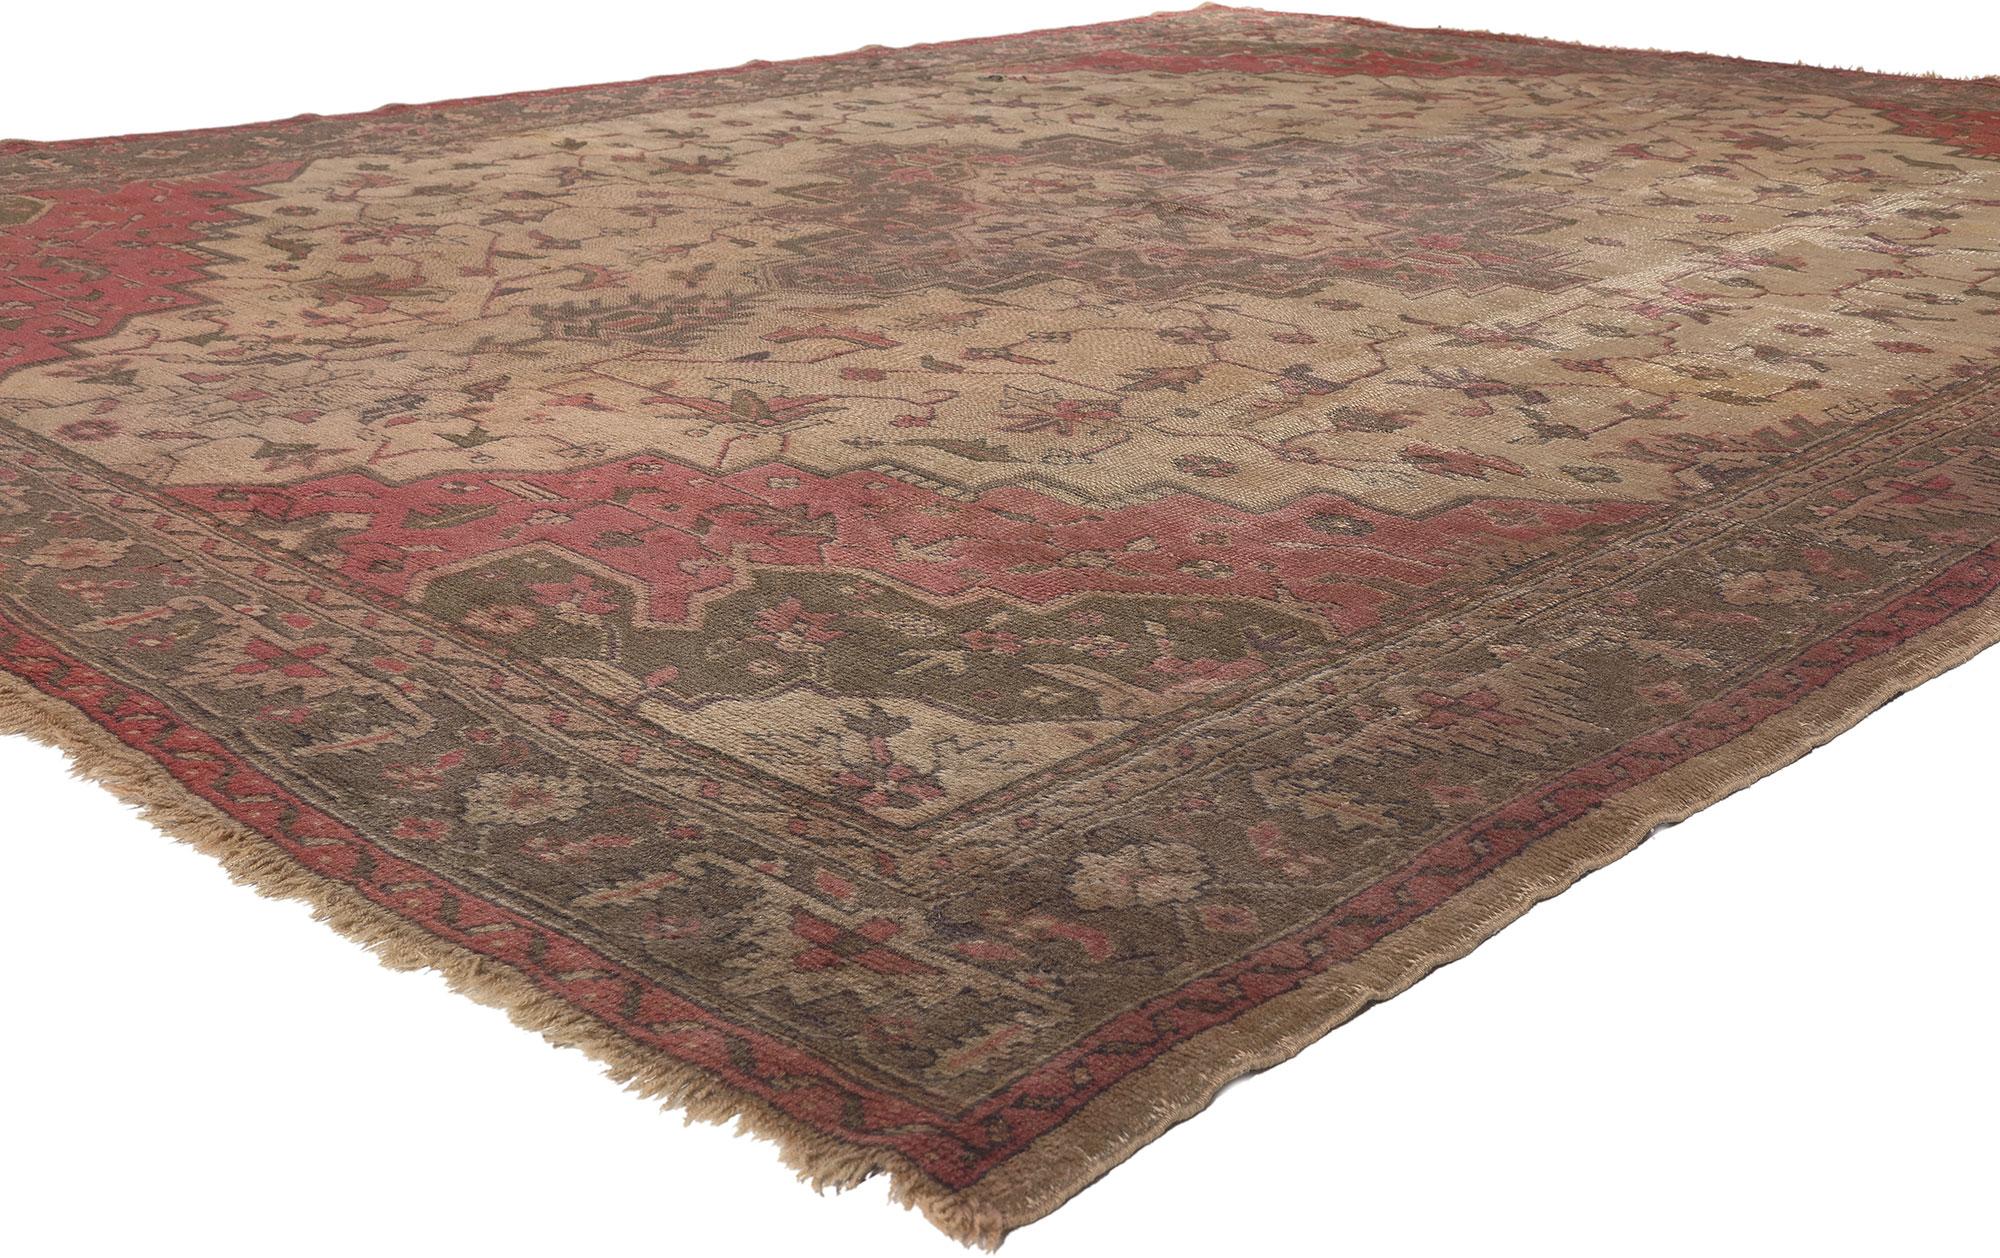 77735 Antique Turkish Serapi Rug, 08'10 x 11'07.
Timeless appeal meets rugged beauty in this hand knotted anitque Turkish Serapi rug. The angular botanical pattern and time-softened earthy colors woven into this piece work together creating a truly